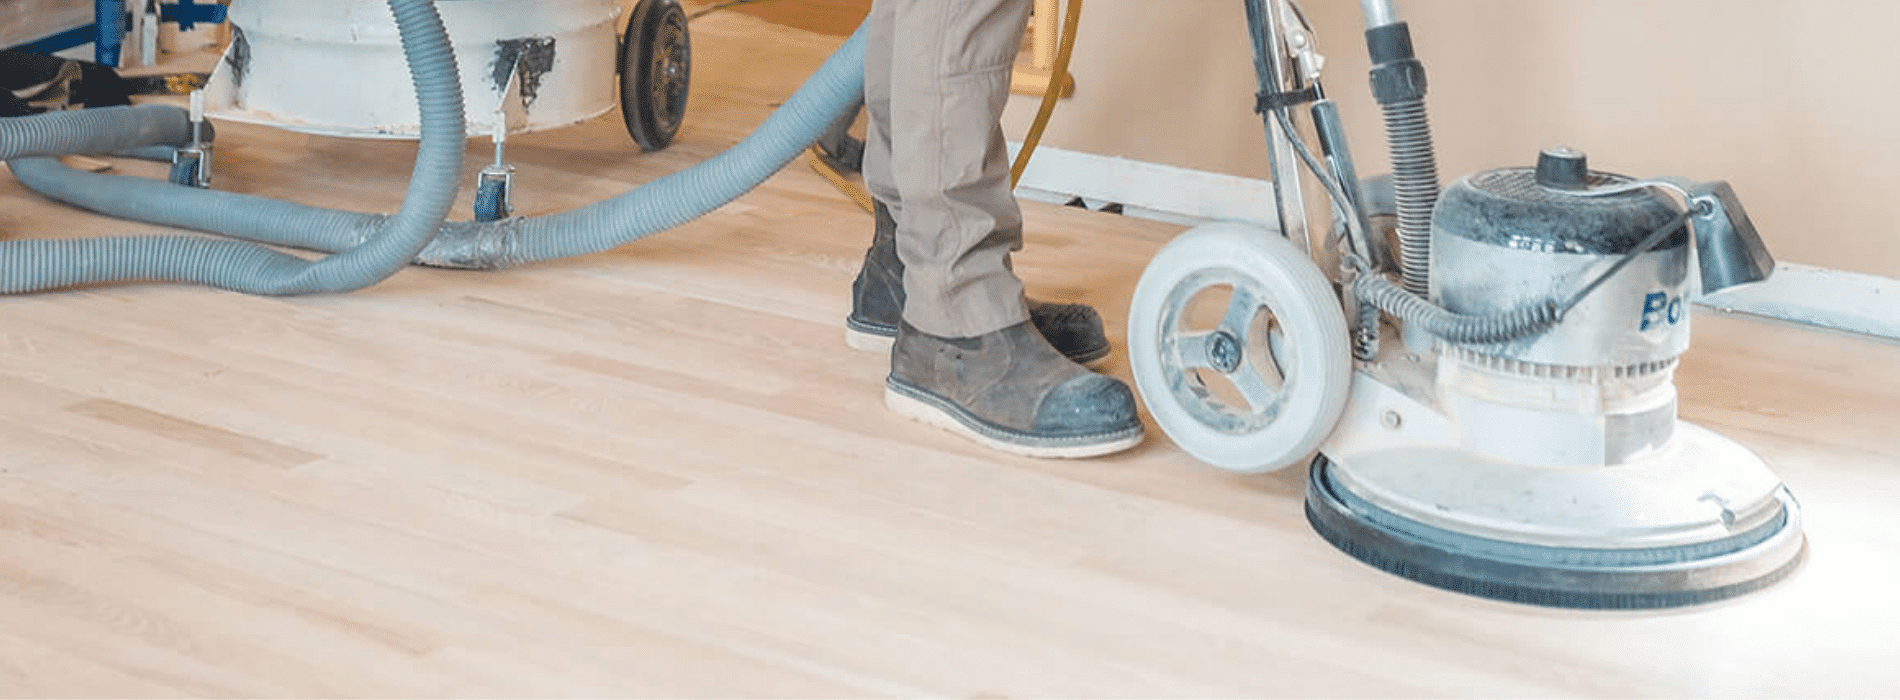 In Boston Manor, TW8, Mr Sander® are using the Bona FlexiSand 1.9, a powerful buffer sander with Ø 407 mm dimensions, 1.9 kW effect, and 230V voltage. It operates at 50 Hz/60 Hz frequency and is connected to a dust extraction system with a HEPA filter for optimal cleanliness and efficiency during the sanding process of a parquet floor. 